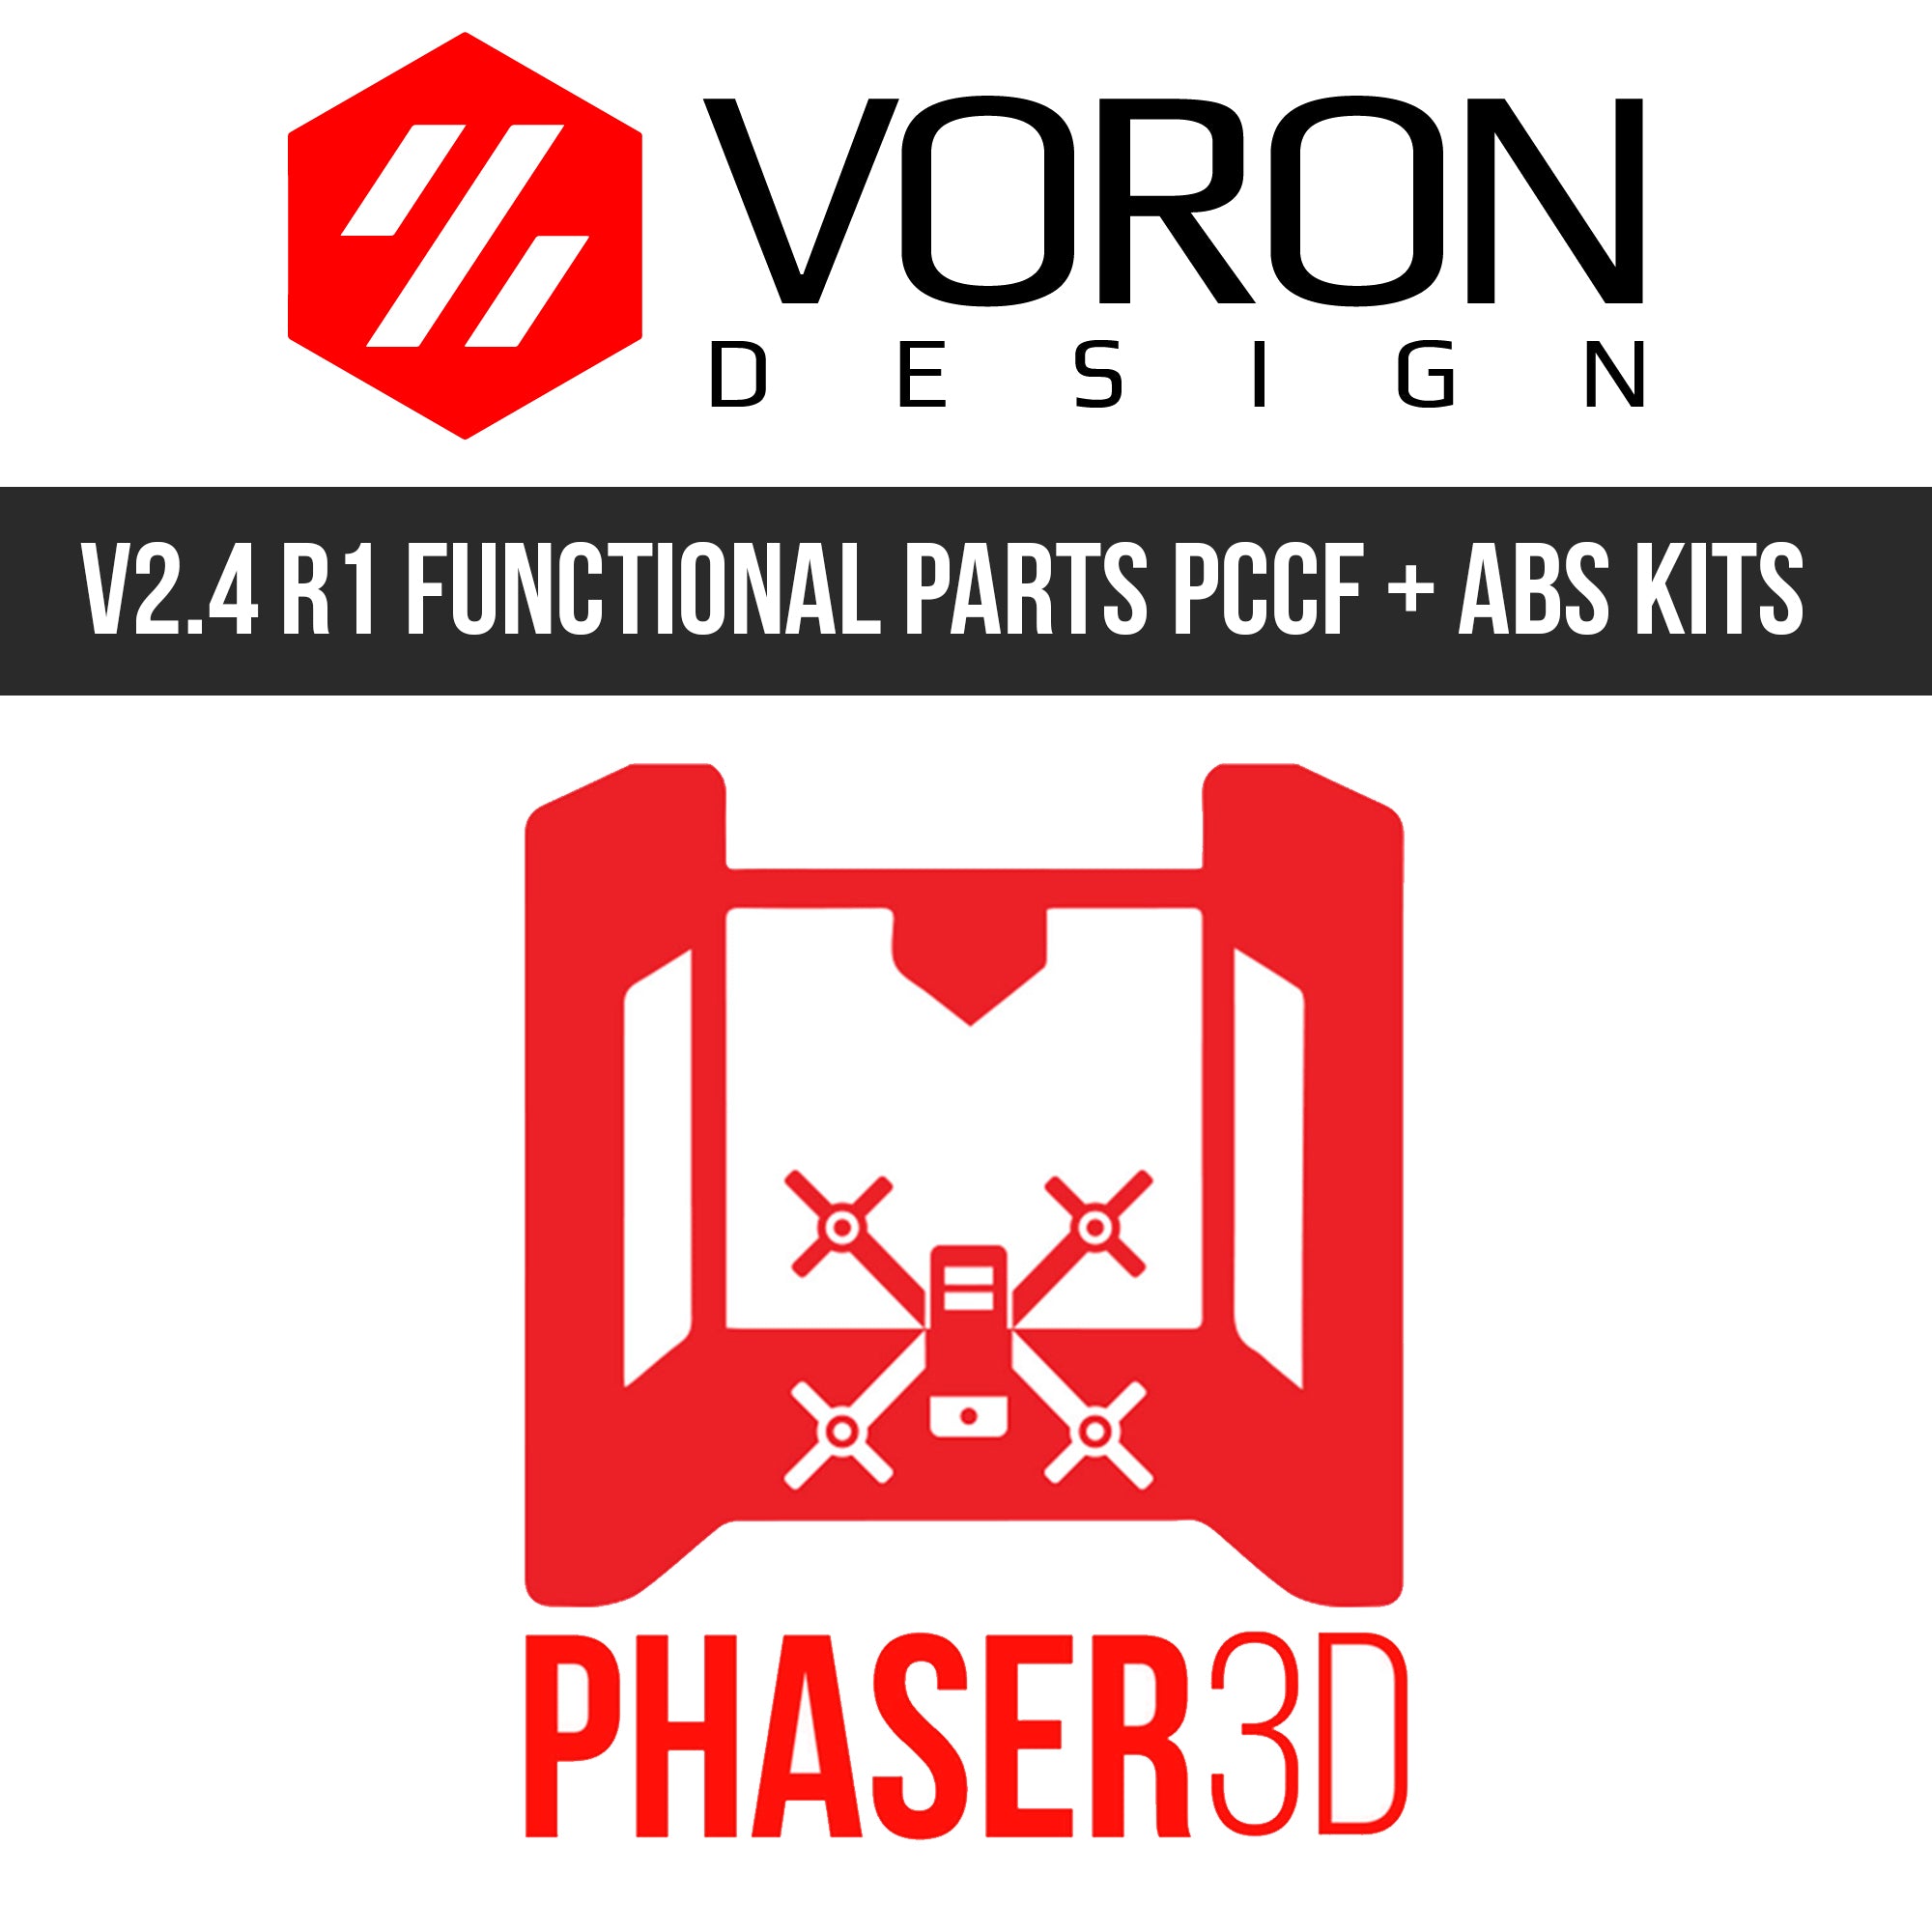 Voron 2.4 R1 Functional Parts Set Printed in Prusament Polycarbonate Carbon Fibre with Fire Engine Red Accents